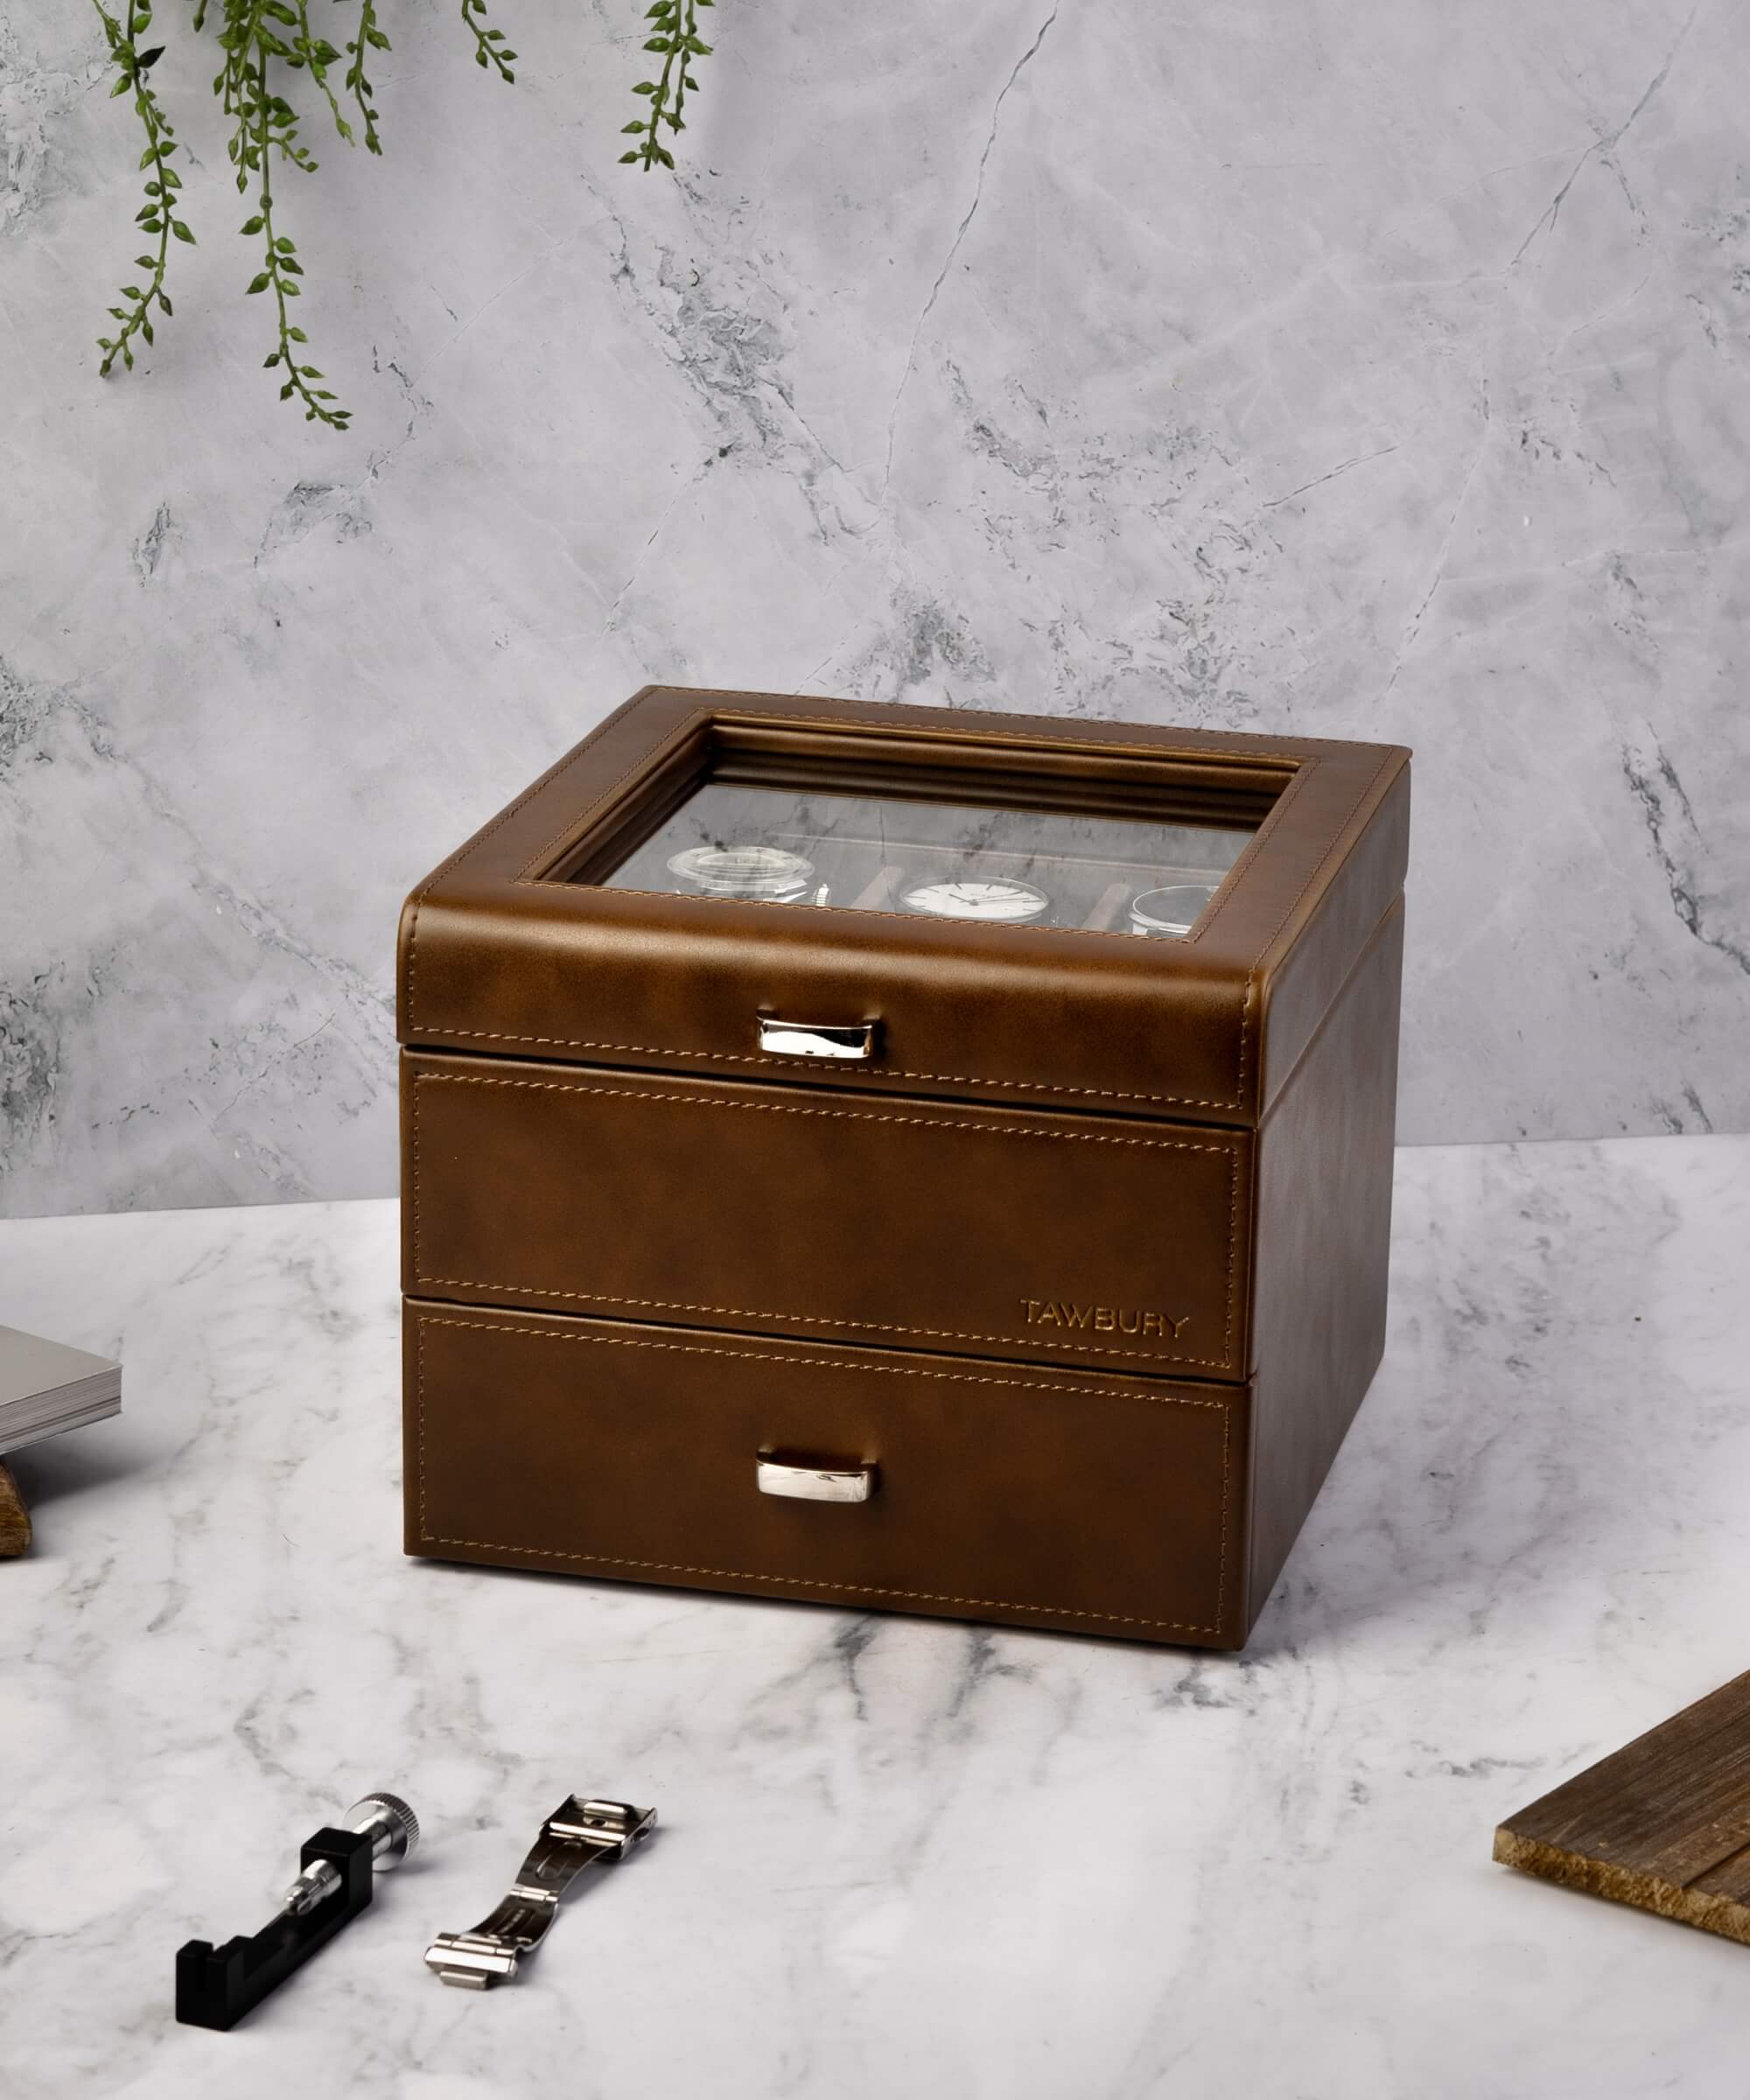 A TAWBURY Bayswater 3 Watch Jewellery Box - Brown, crafted with brown leather, elegantly placed on a marble table.